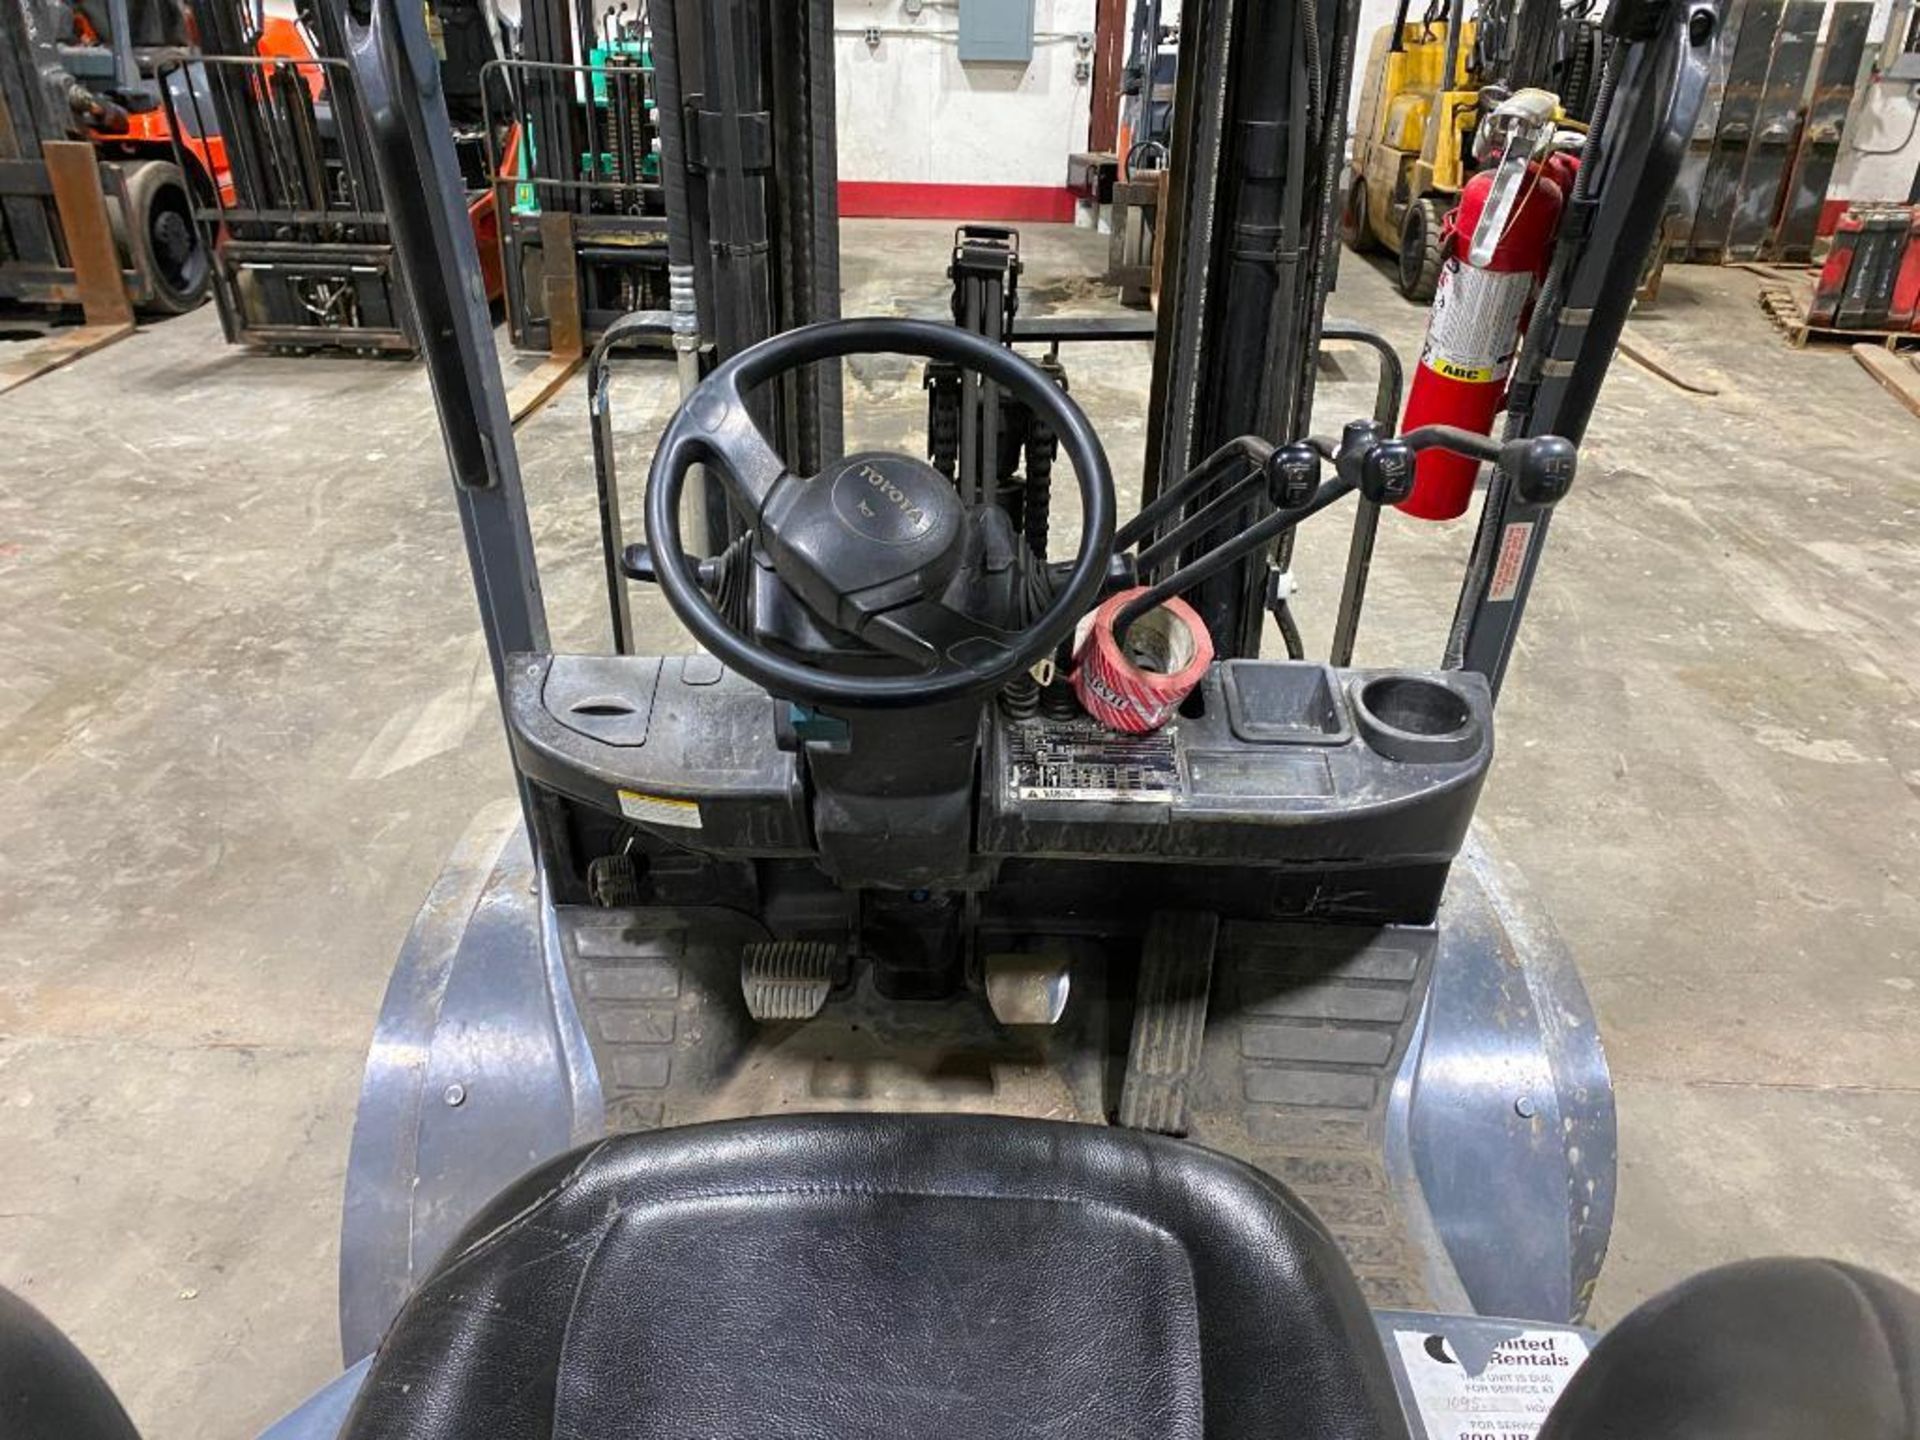 2017 Toyota 5,000-LB. Capacity Forklift, Model 8FGU25, S/N 83598, LPG, Solid Pneumatic Tires, 3-Stag - Image 5 of 5